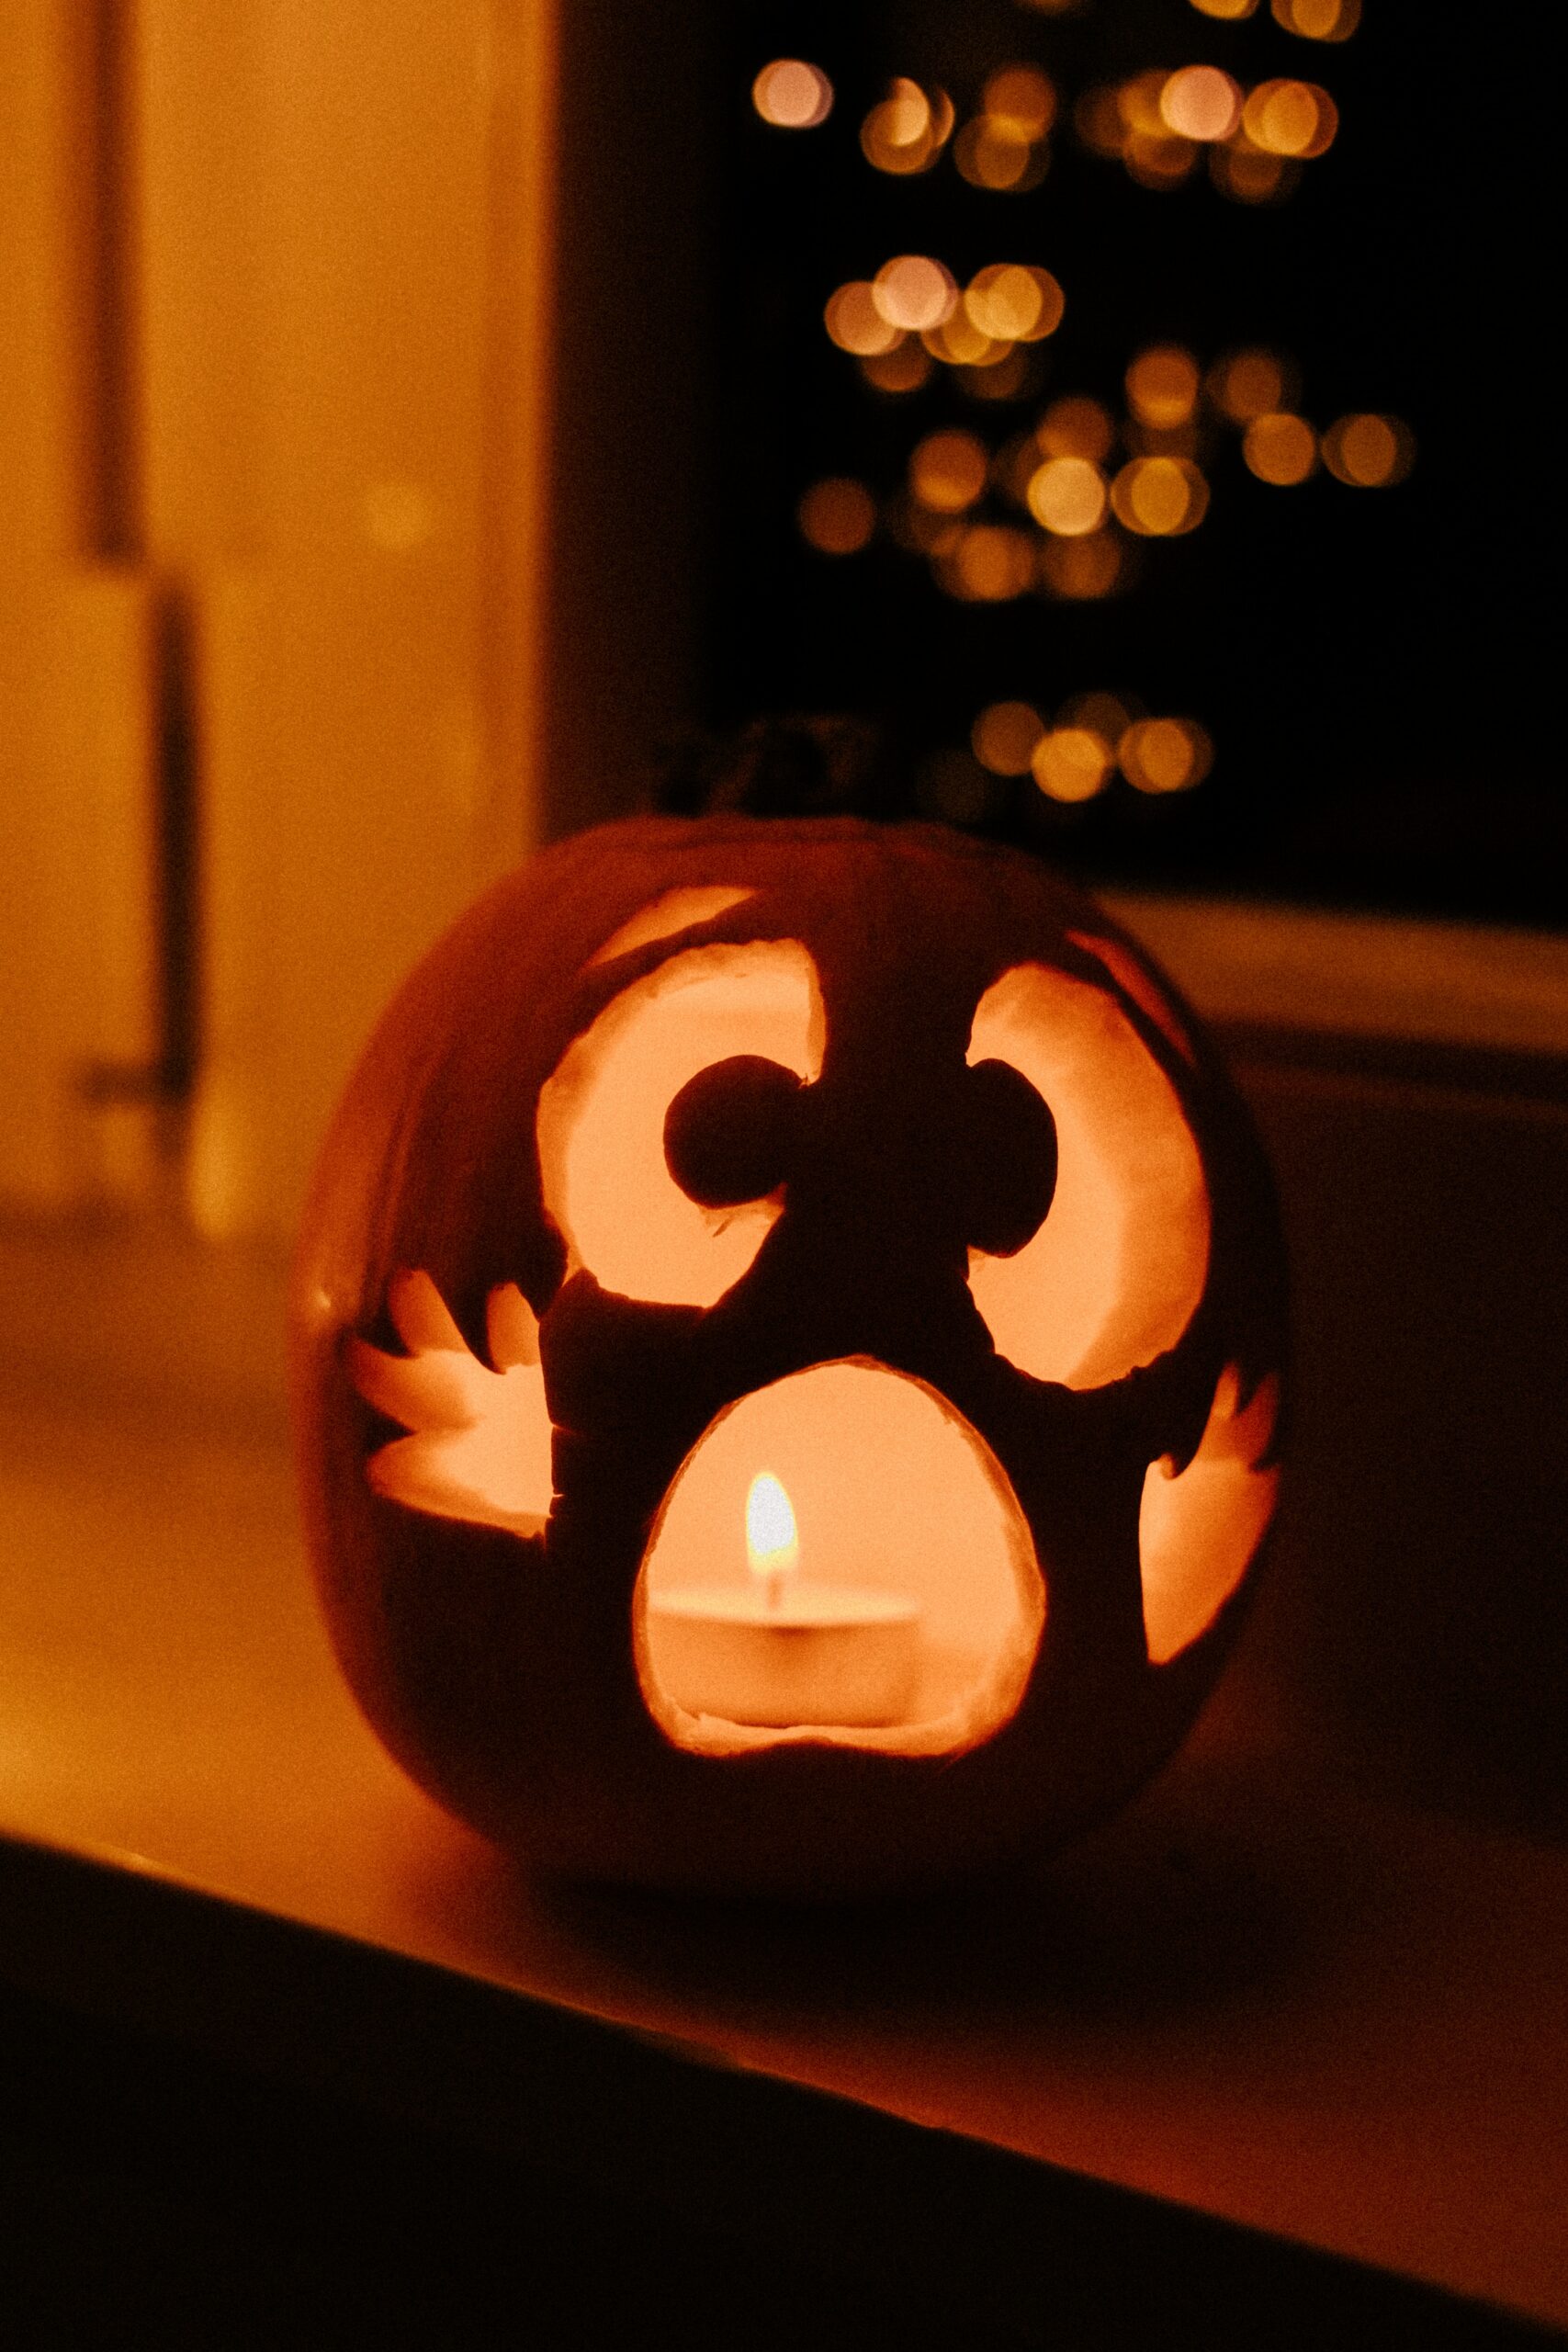 A candlelit jack-o'-lantern with a surprised face